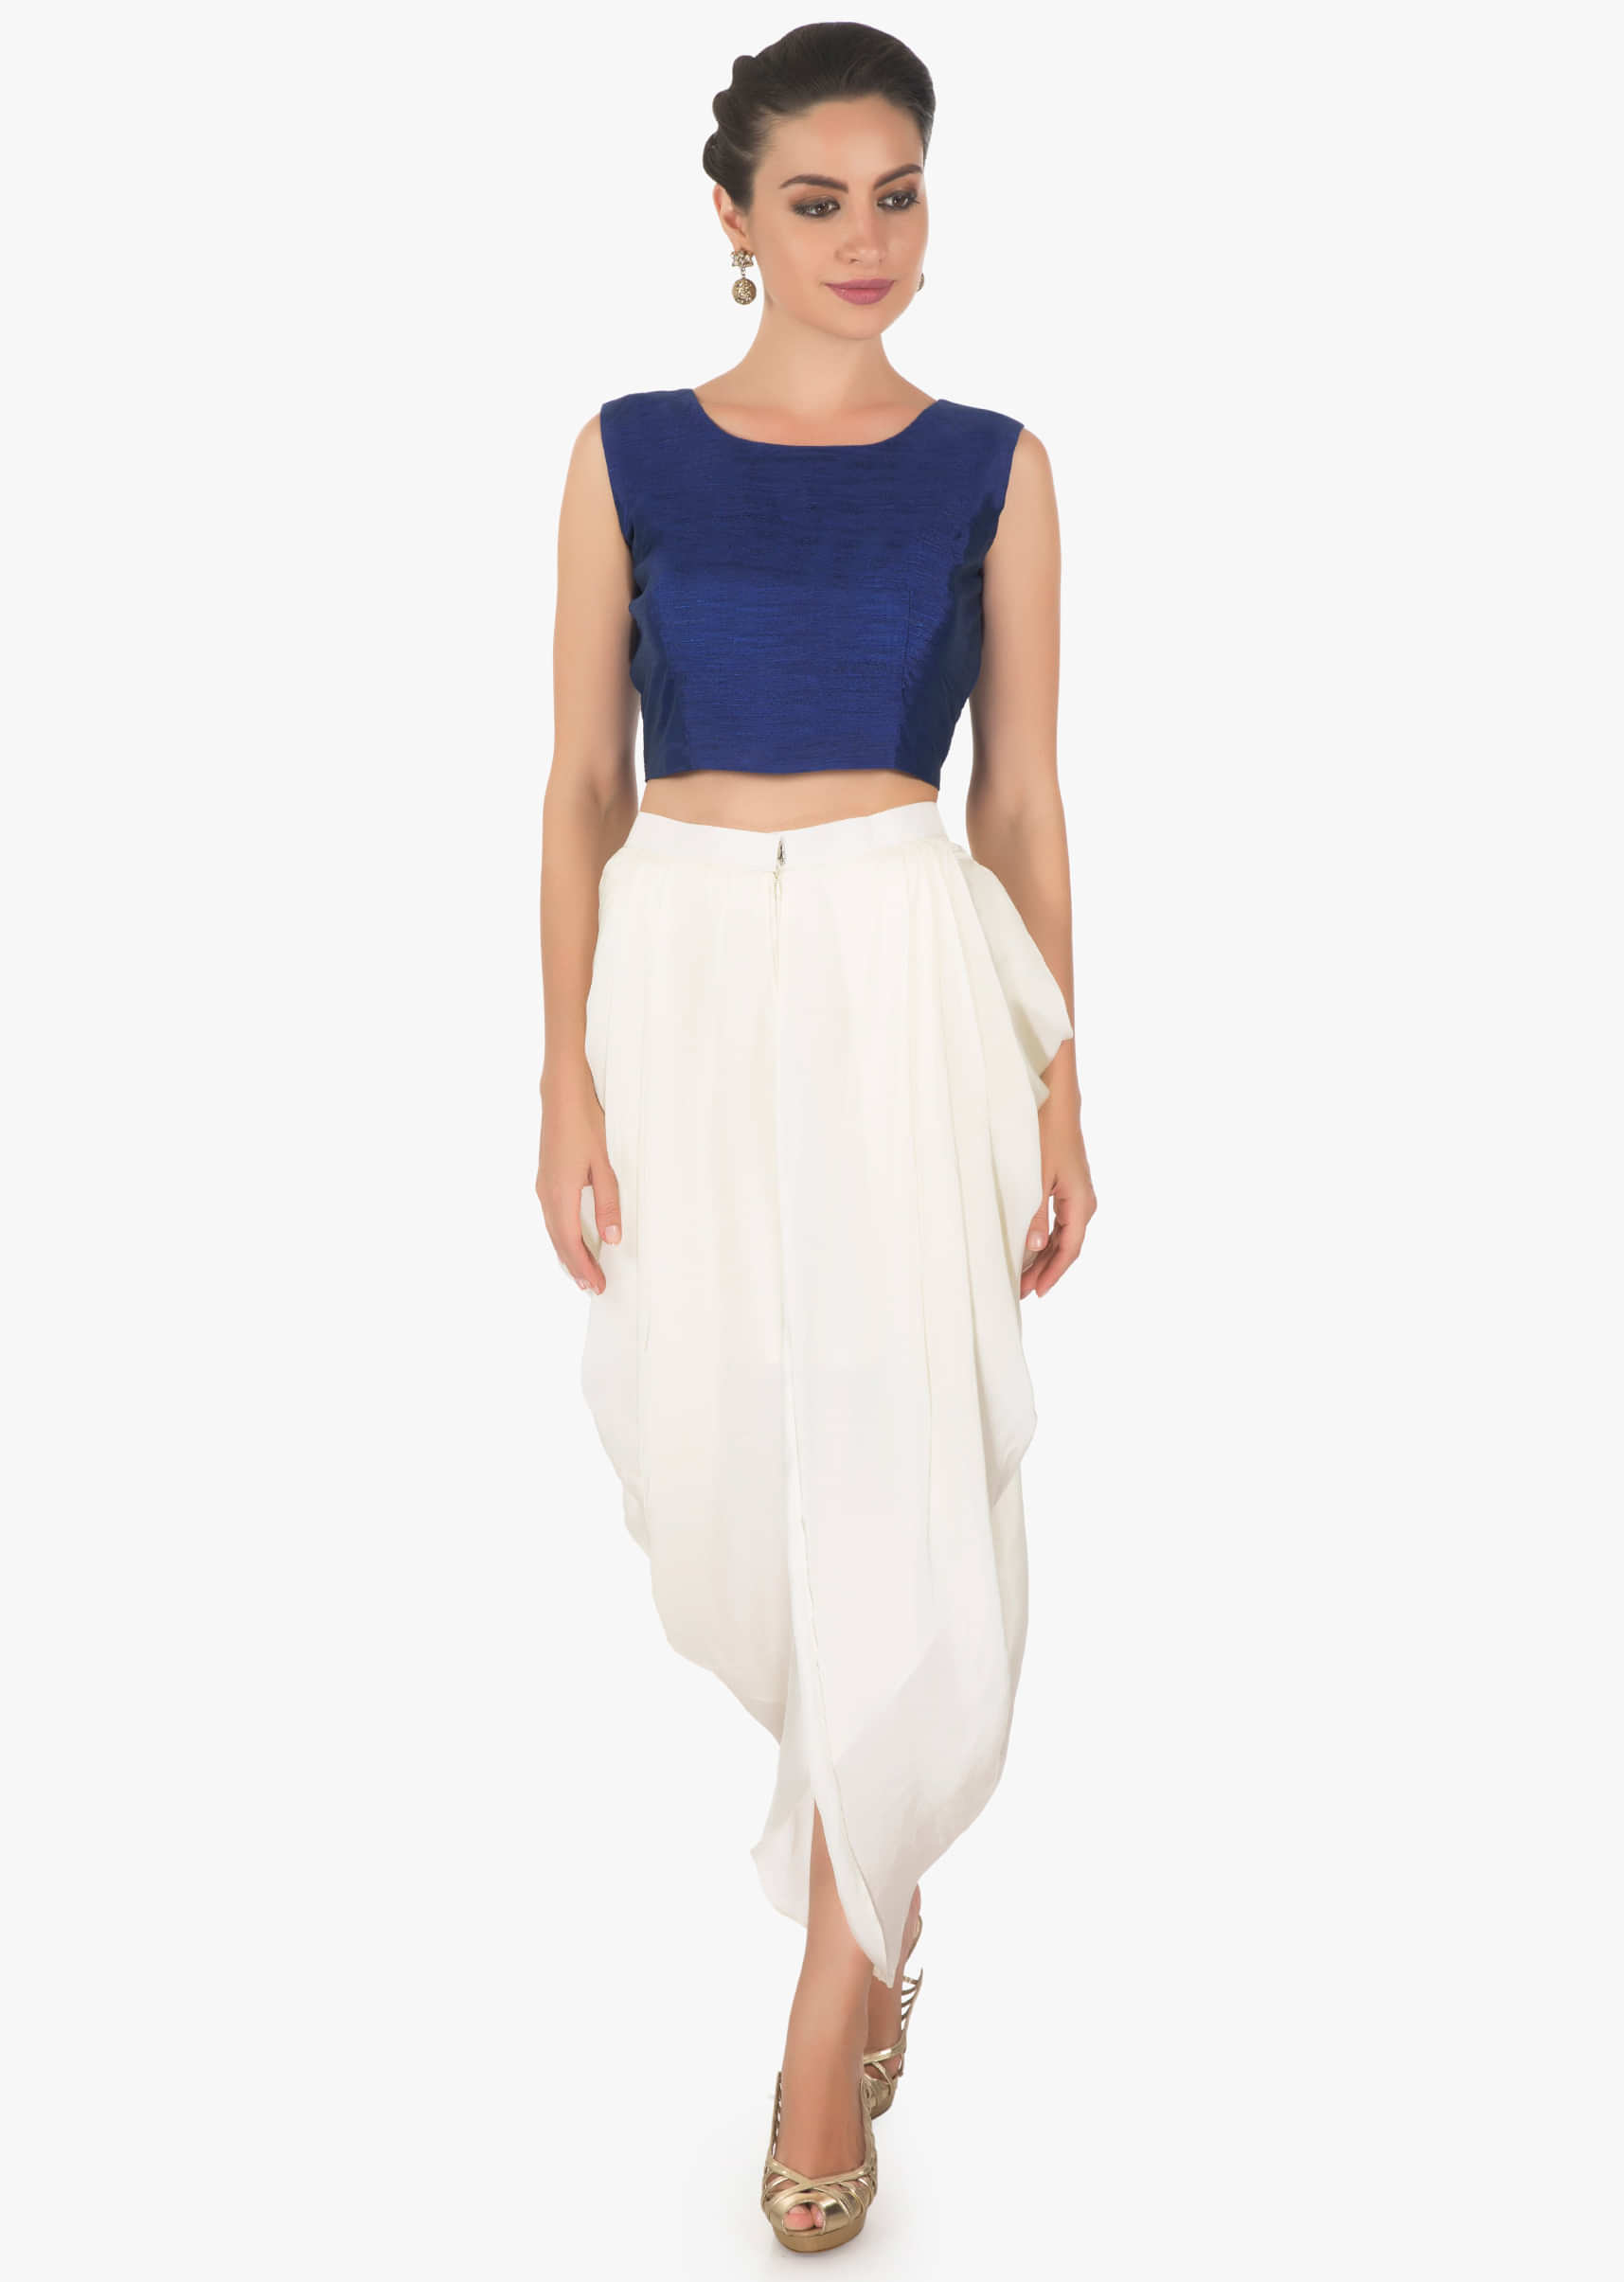 Royal Blue Crop Top In Raw Silk With A Cape Jacket Matched With Fancy Dhoti Pants